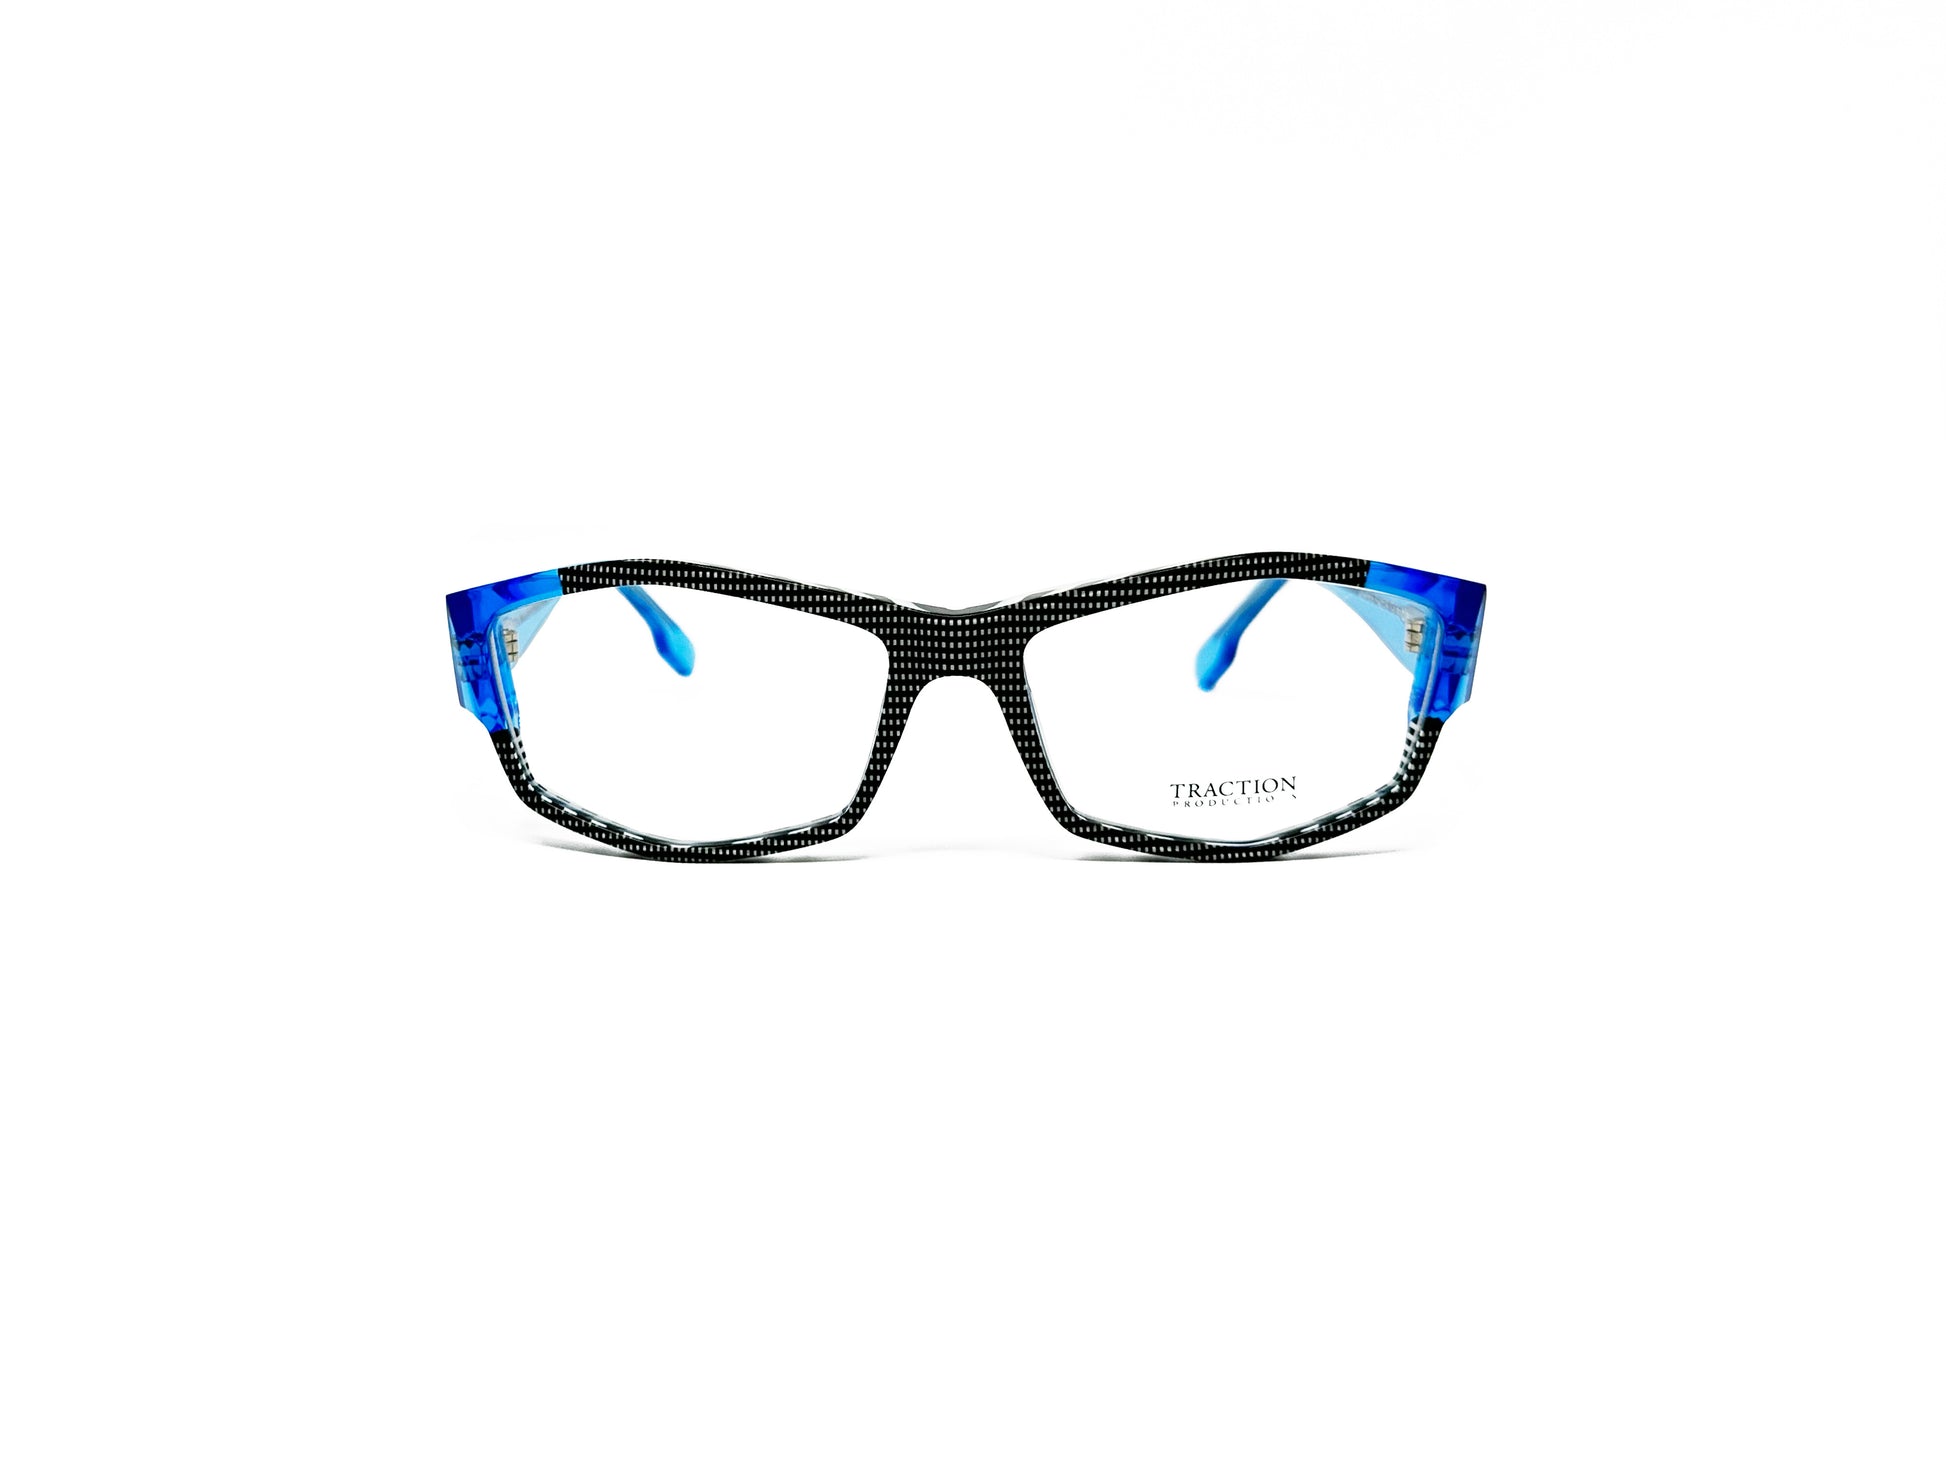 Traction angular acetate optical frame. Model: Martha. Color: Gris Bleu - Black and white polka dots with blue on corners and temples. Front view. 